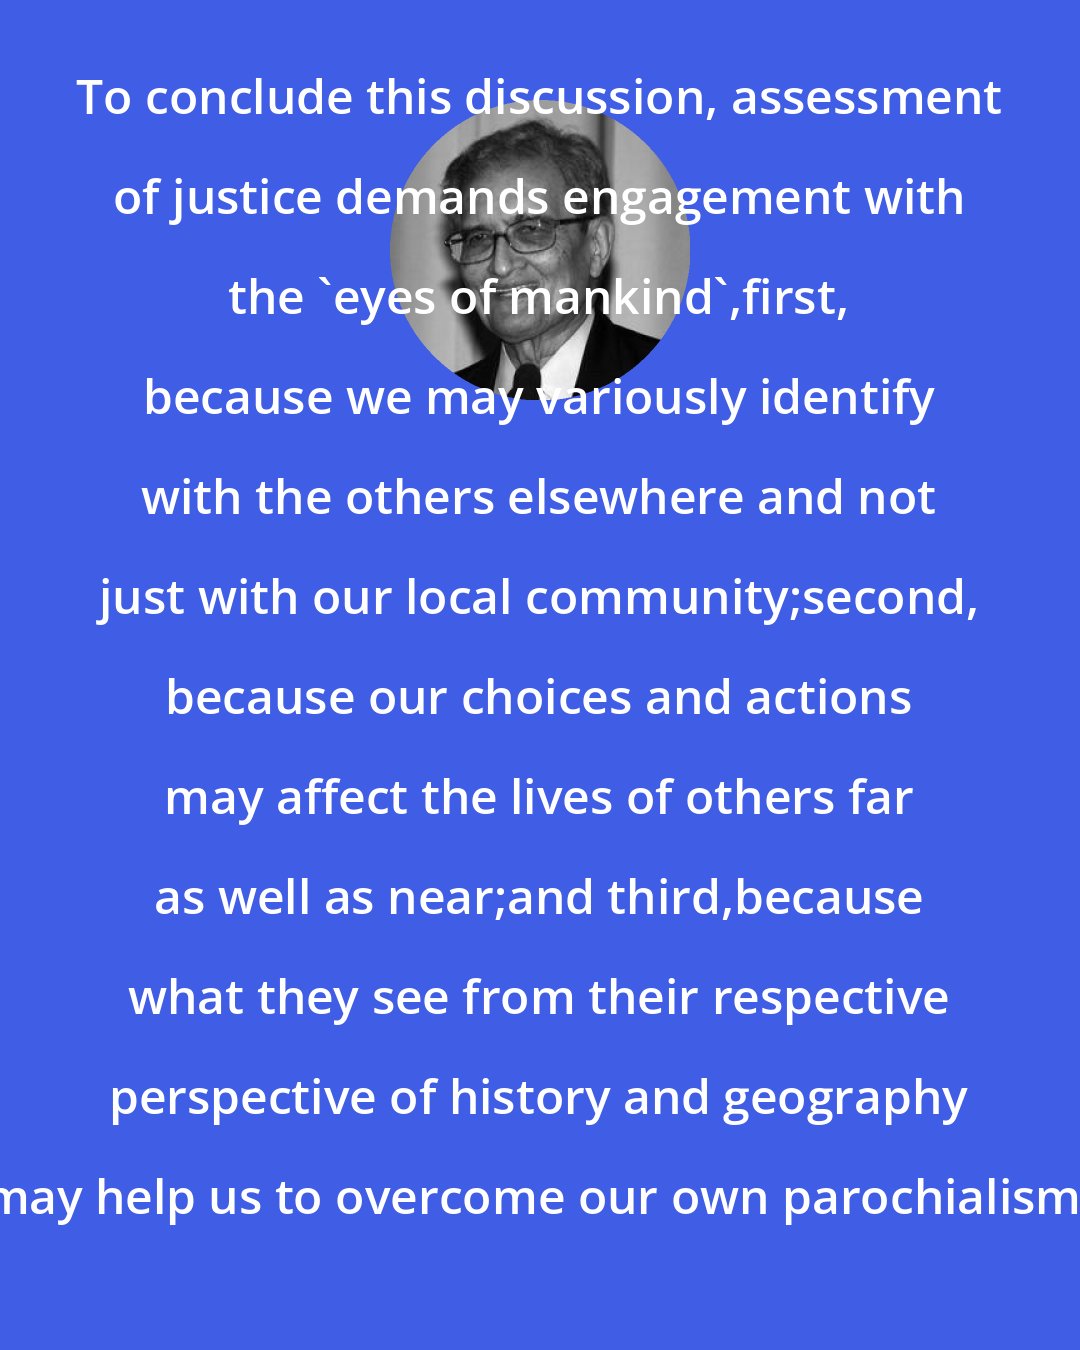 Amartya Sen: To conclude this discussion, assessment of justice demands engagement with the 'eyes of mankind',first, because we may variously identify with the others elsewhere and not just with our local community;second, because our choices and actions may affect the lives of others far as well as near;and third,because what they see from their respective perspective of history and geography may help us to overcome our own parochialism.